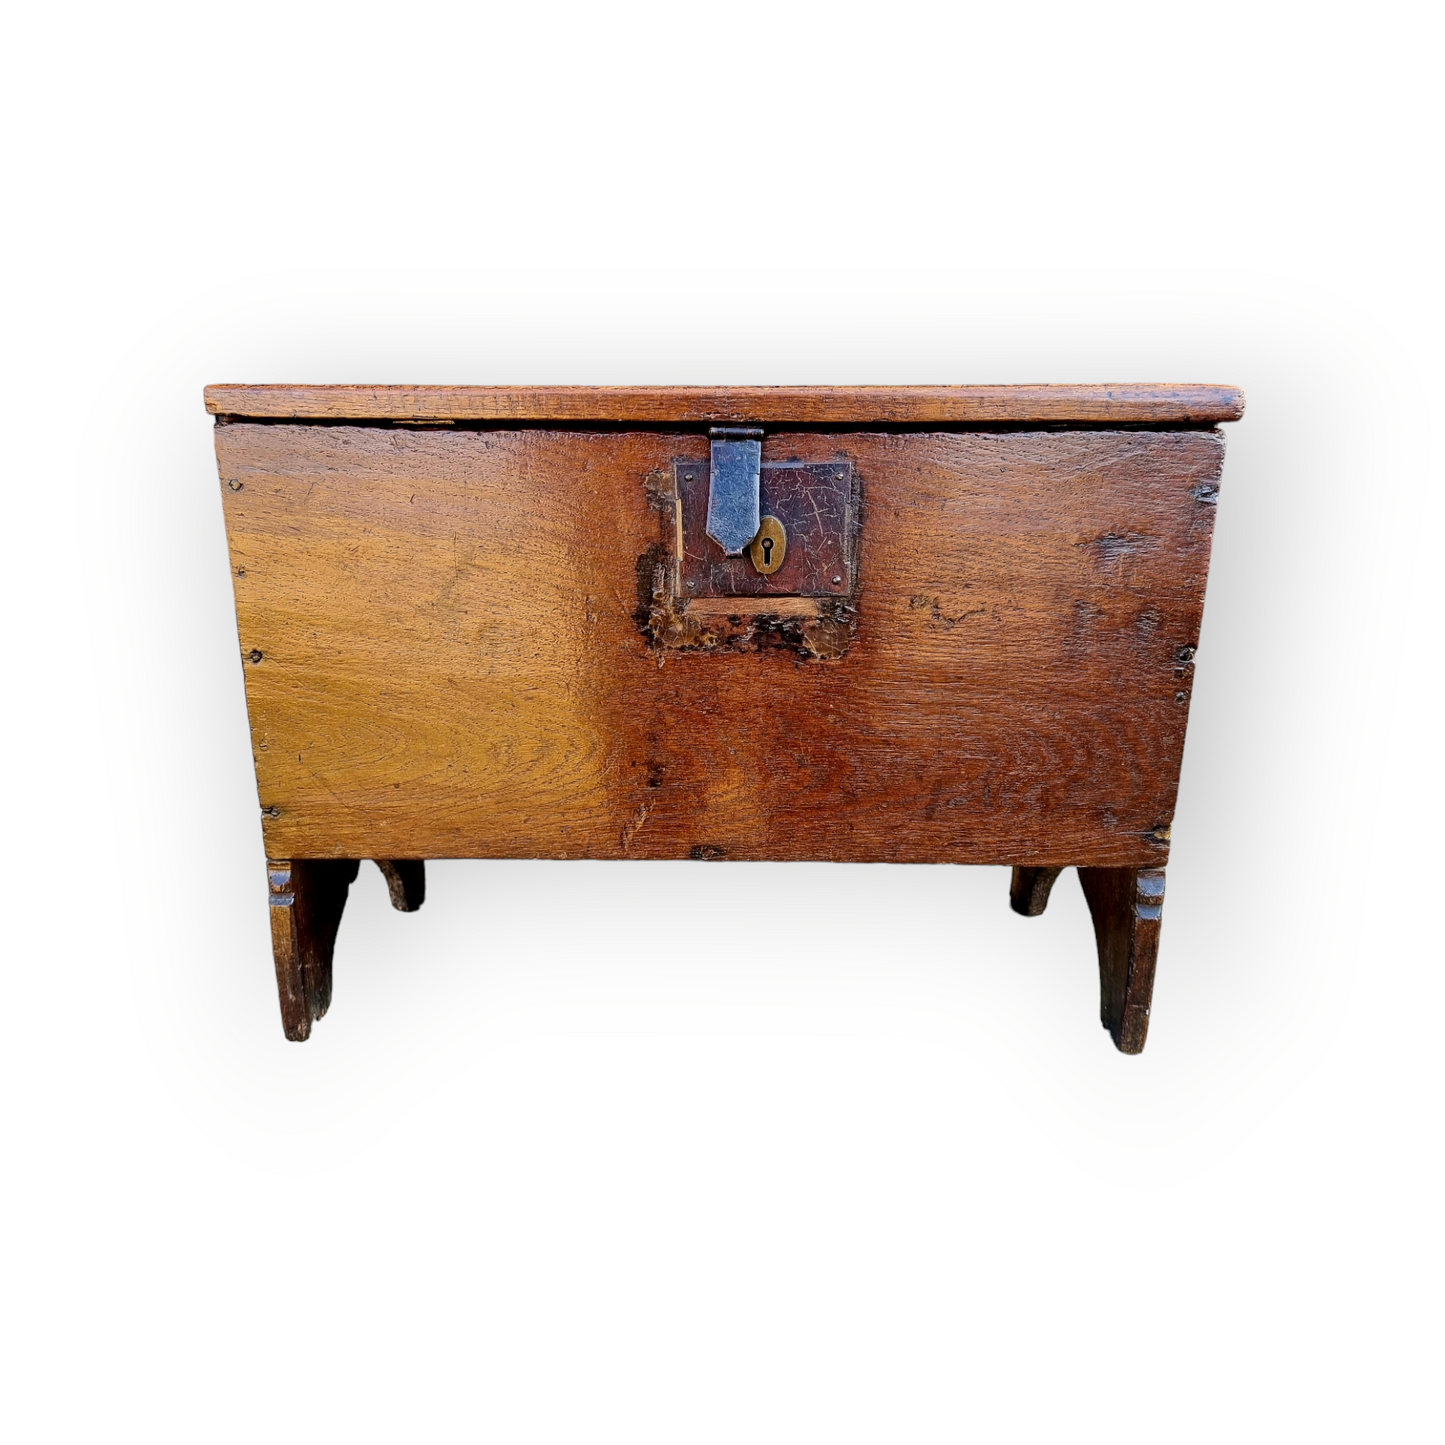 Diminutive Early 17th-century English Antique Oak Boarded Coffer or Chest